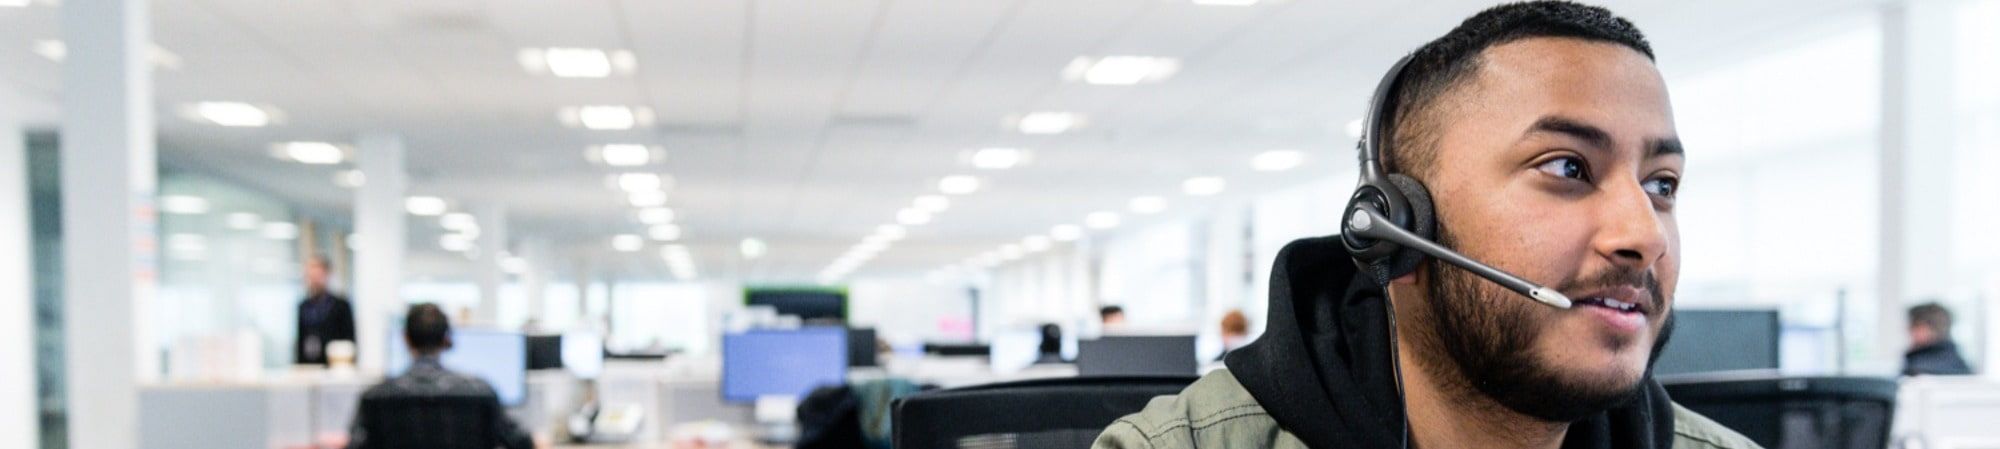 man in call centre with headset